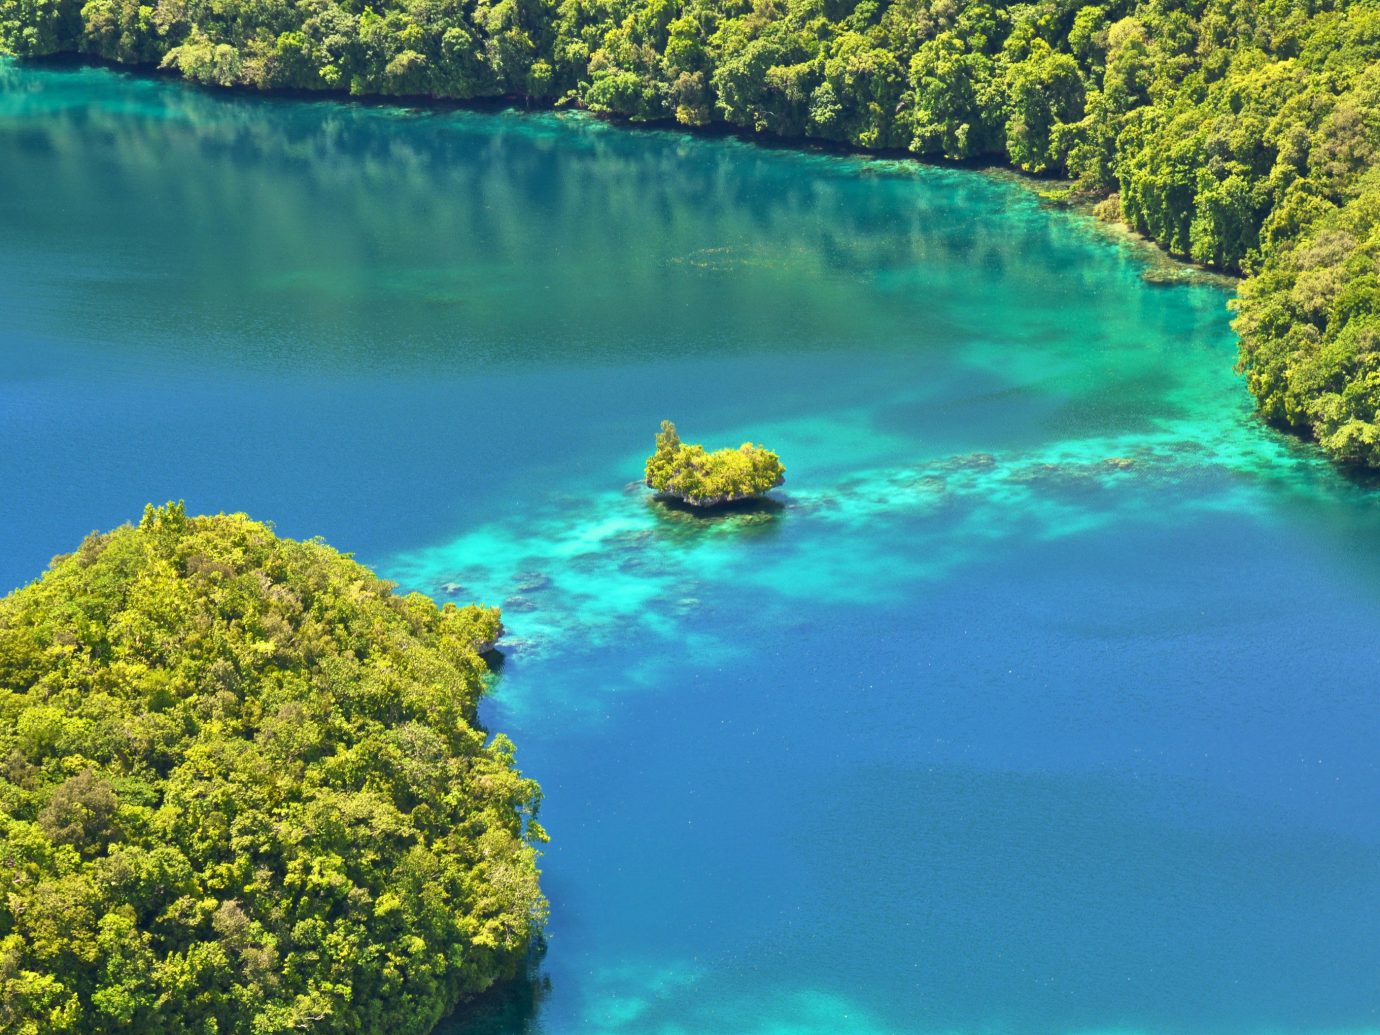 Islands Offbeat Trip Ideas tree water reef landform body of water River Nature Lake Lagoon Sea surrounded